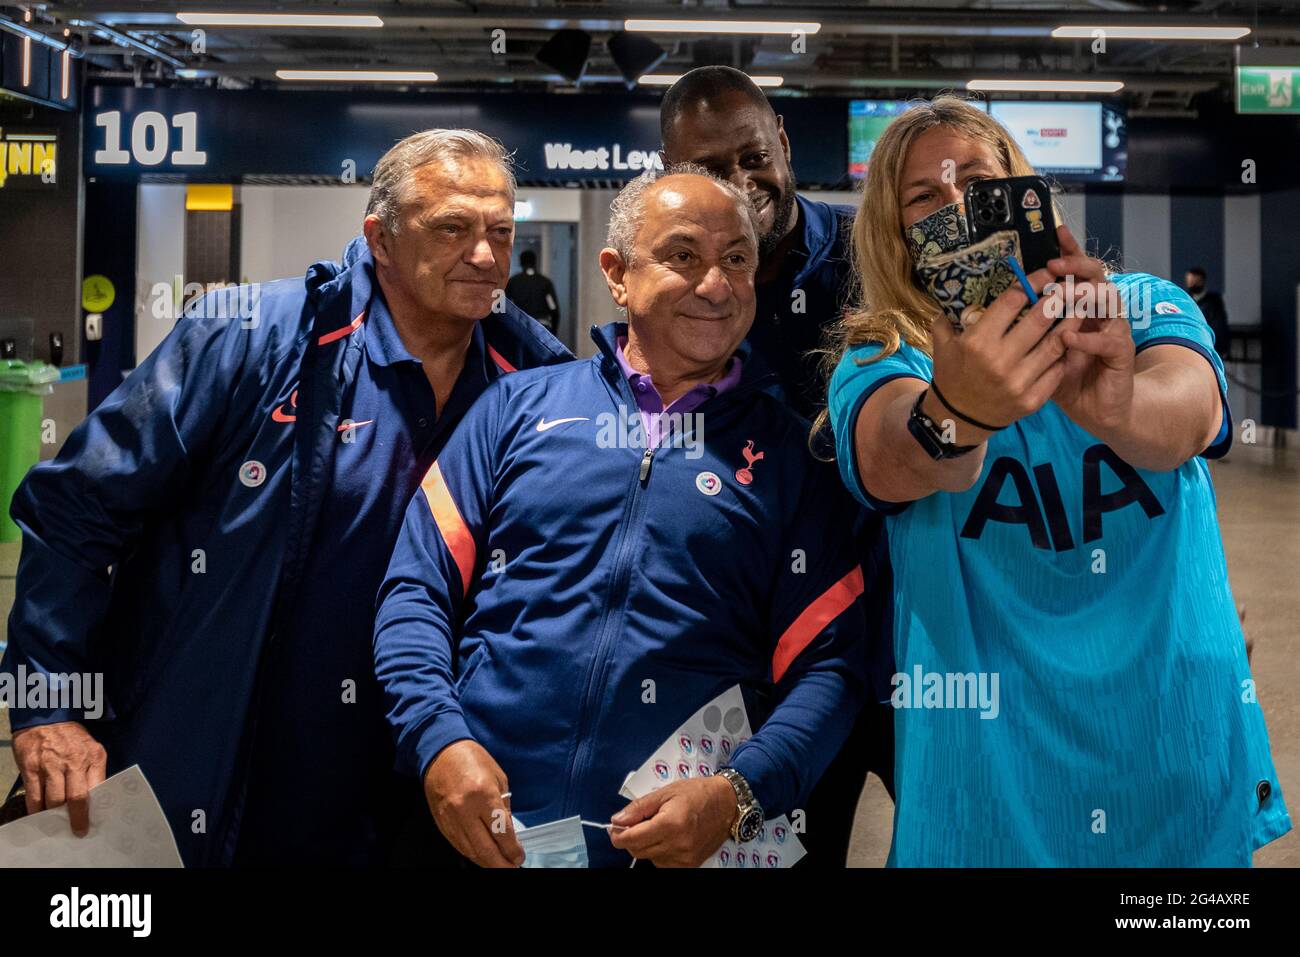 London, UK.  20 June 2021.  Former Spurs players (L to R) Gary Mabbutt, Ossie Ardiles and Ledley King pose with a woman after she received her Pfizer vaccine jab at a mass vaccination centre at Tottenham Hotspur stadium as the capital aims for 100,000 doses administered per day. Chelsea, West Ham and Charlton were other London football clubs who took part the previous day.  Credit: Stephen Chung / Alamy Live News Stock Photo